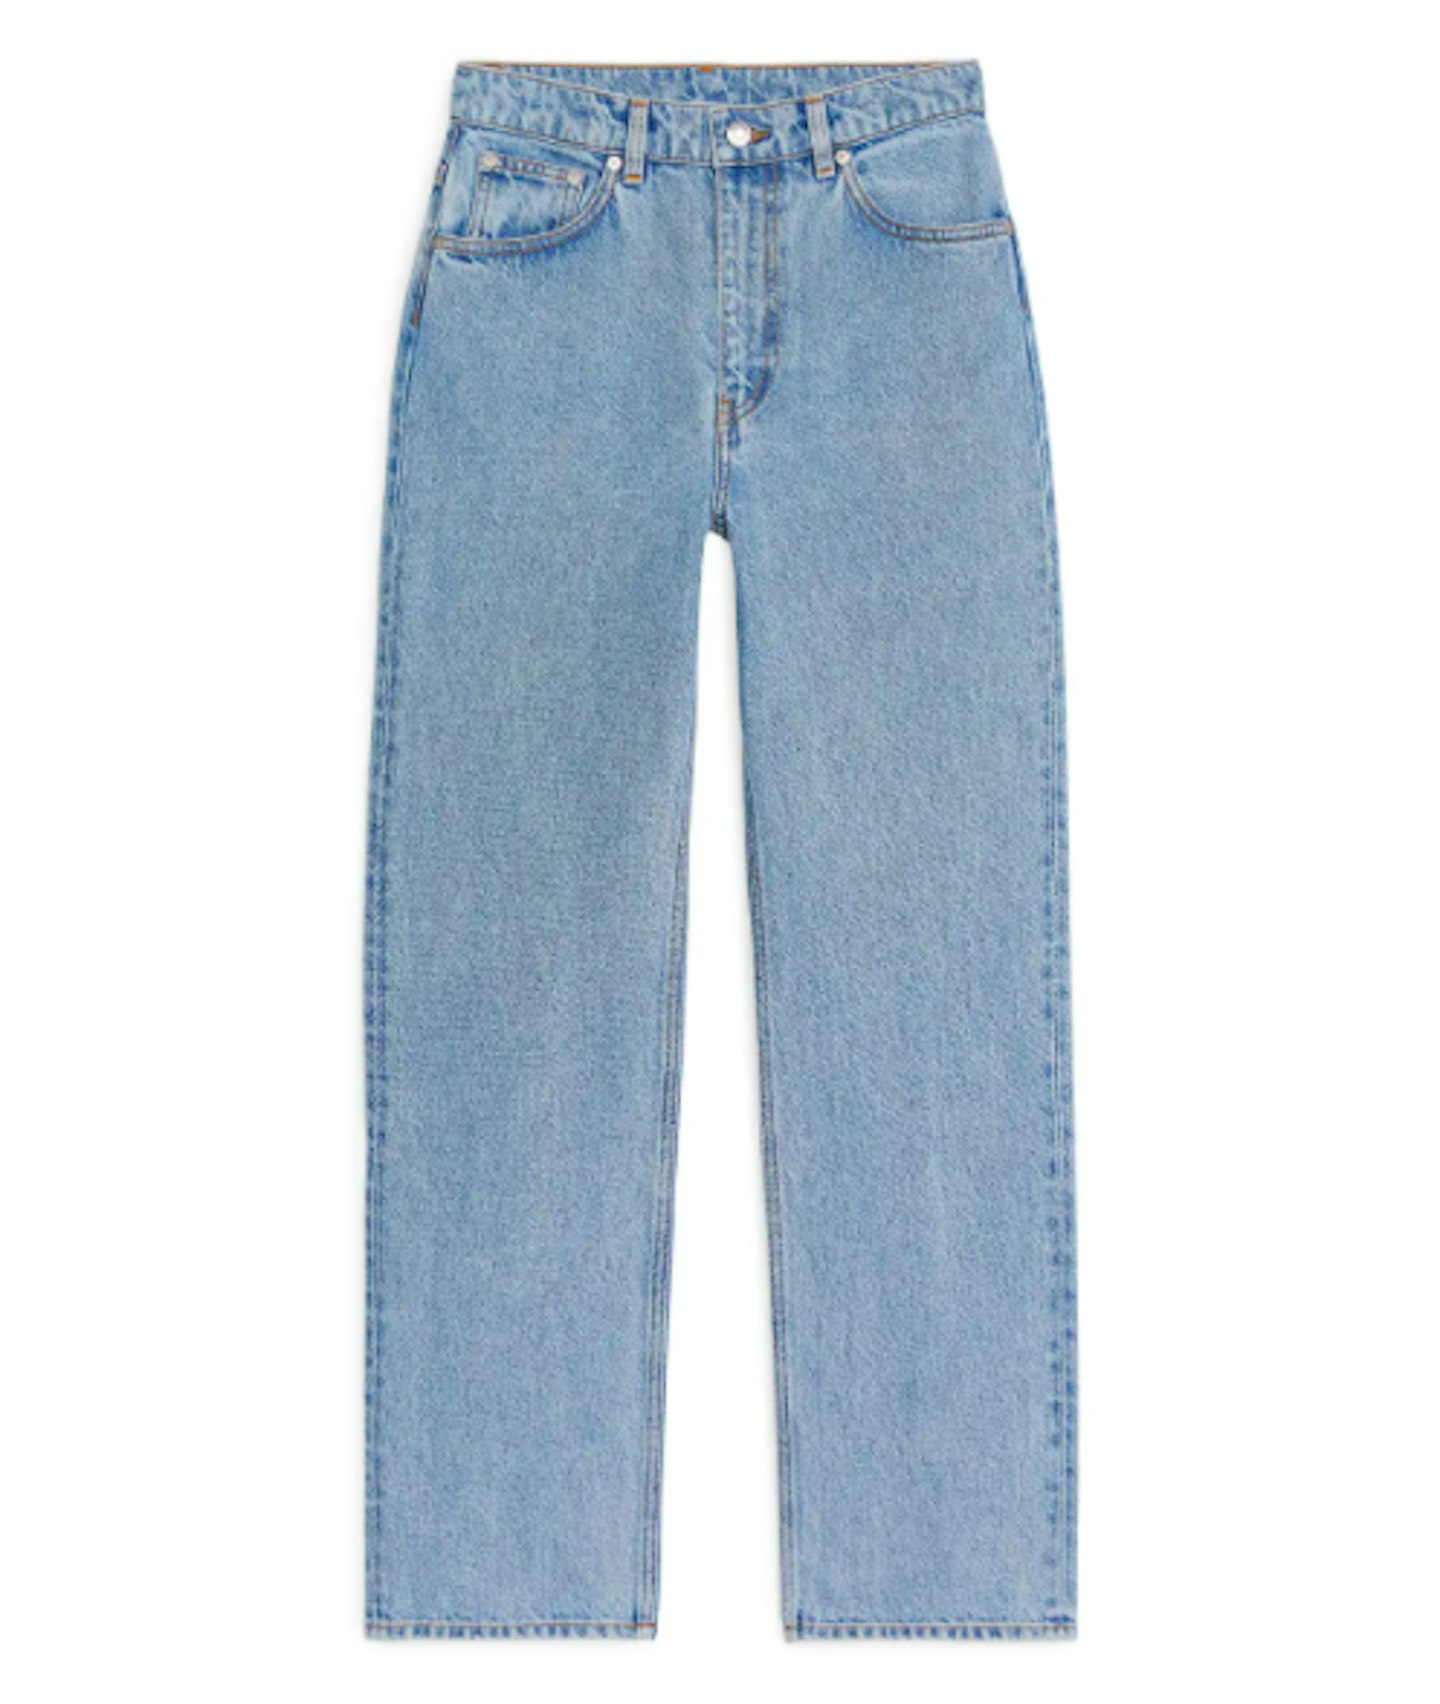 Arket, Straight Cropped Jeans, £59